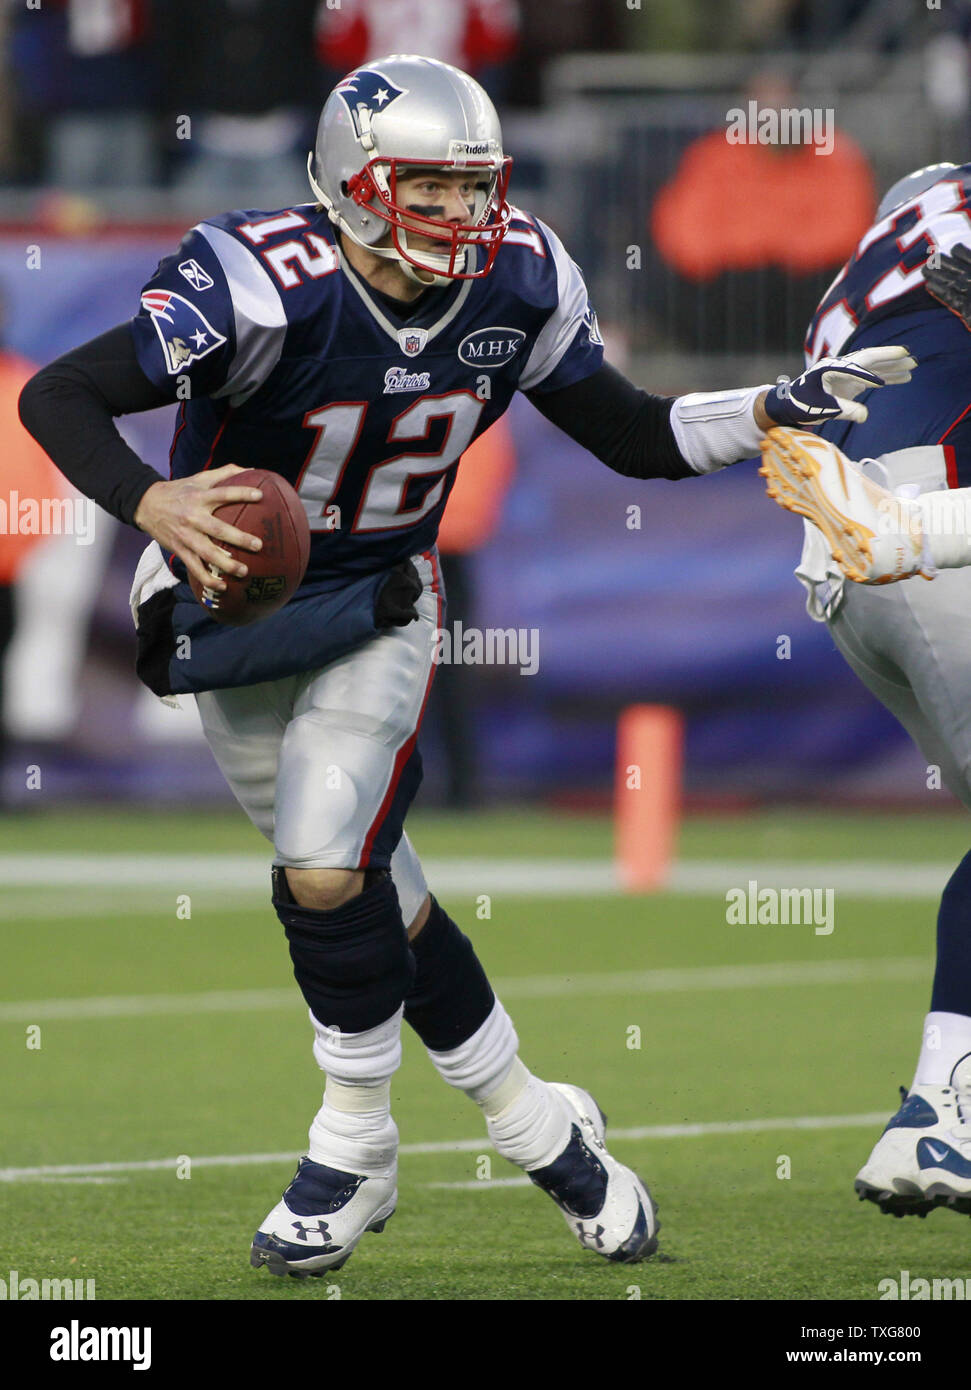 New England Patriots quarterback Tom Brady scrambles in the fourth quarter against the Miami Dolphins at Gillette Stadium in Foxboro, Massachusetts on December 24, 2011.  The Patriots defeated the Dolphins 27-24.     UPI/Matthew Healey Stock Photo